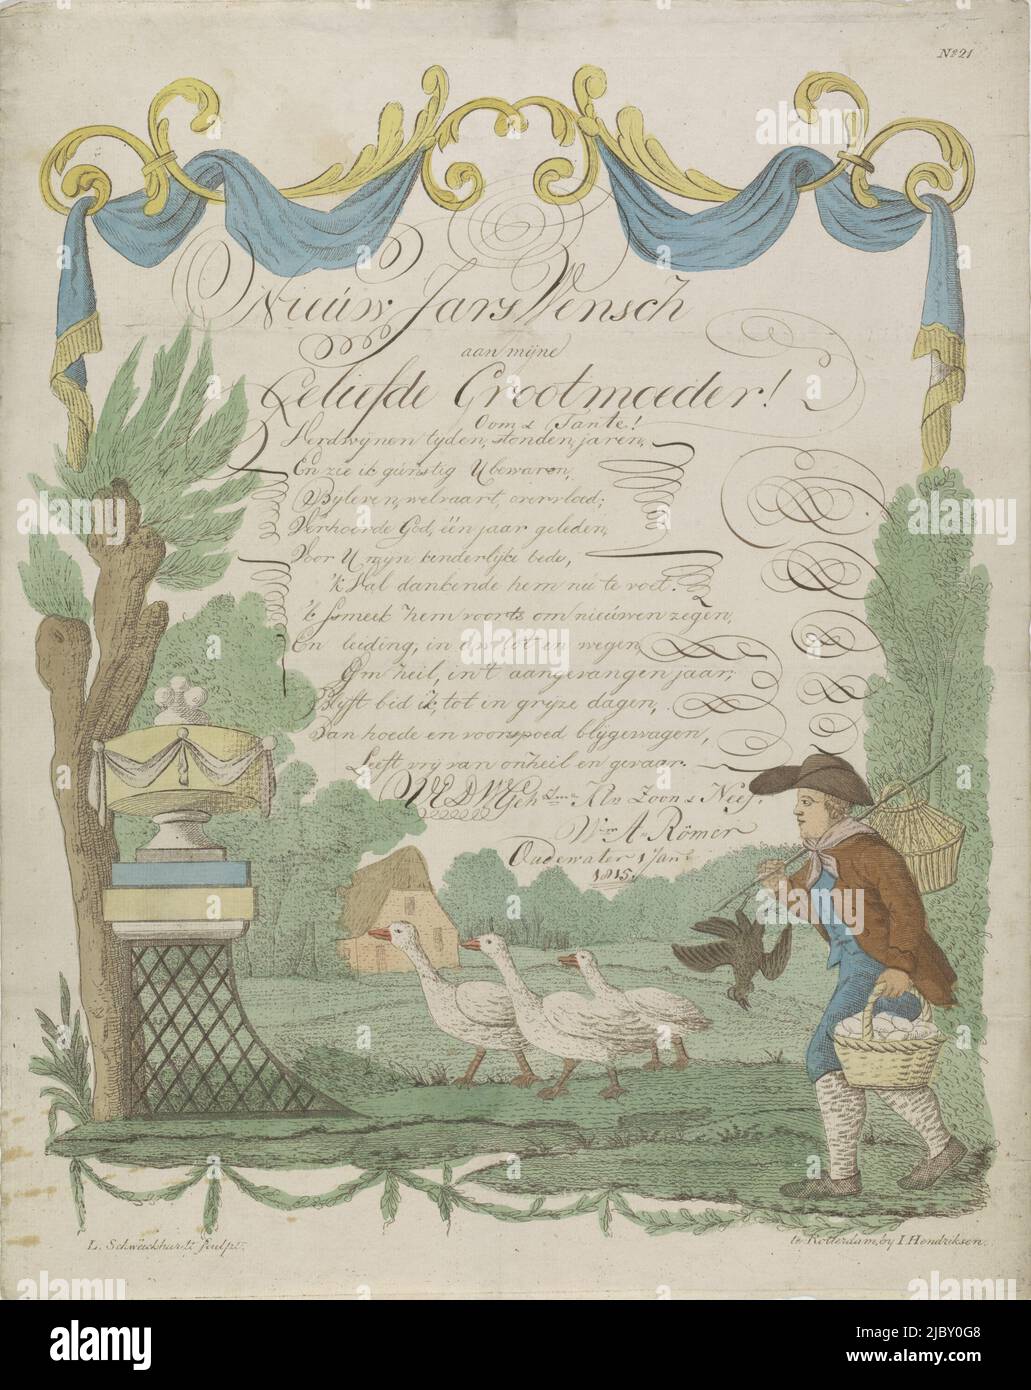 Wish letter with described cartouche within a decorative frame depicting a farmer with a basket of eggs and three geese. Handwritten message in calligraphy (New Year's wish) by W.A. Römer to his grandmother. Numbered top right: No. 21., Letter of Wish with a farmer and his geese., print maker: Leonardus Schweickhardt, (mentioned on object), publisher: Jan Hendriksen, (mentioned on object), print maker: The Hague, publisher: Rotterdam, 1815, paper, etching, pen, h 412 mm × w 325 mm Stock Photo